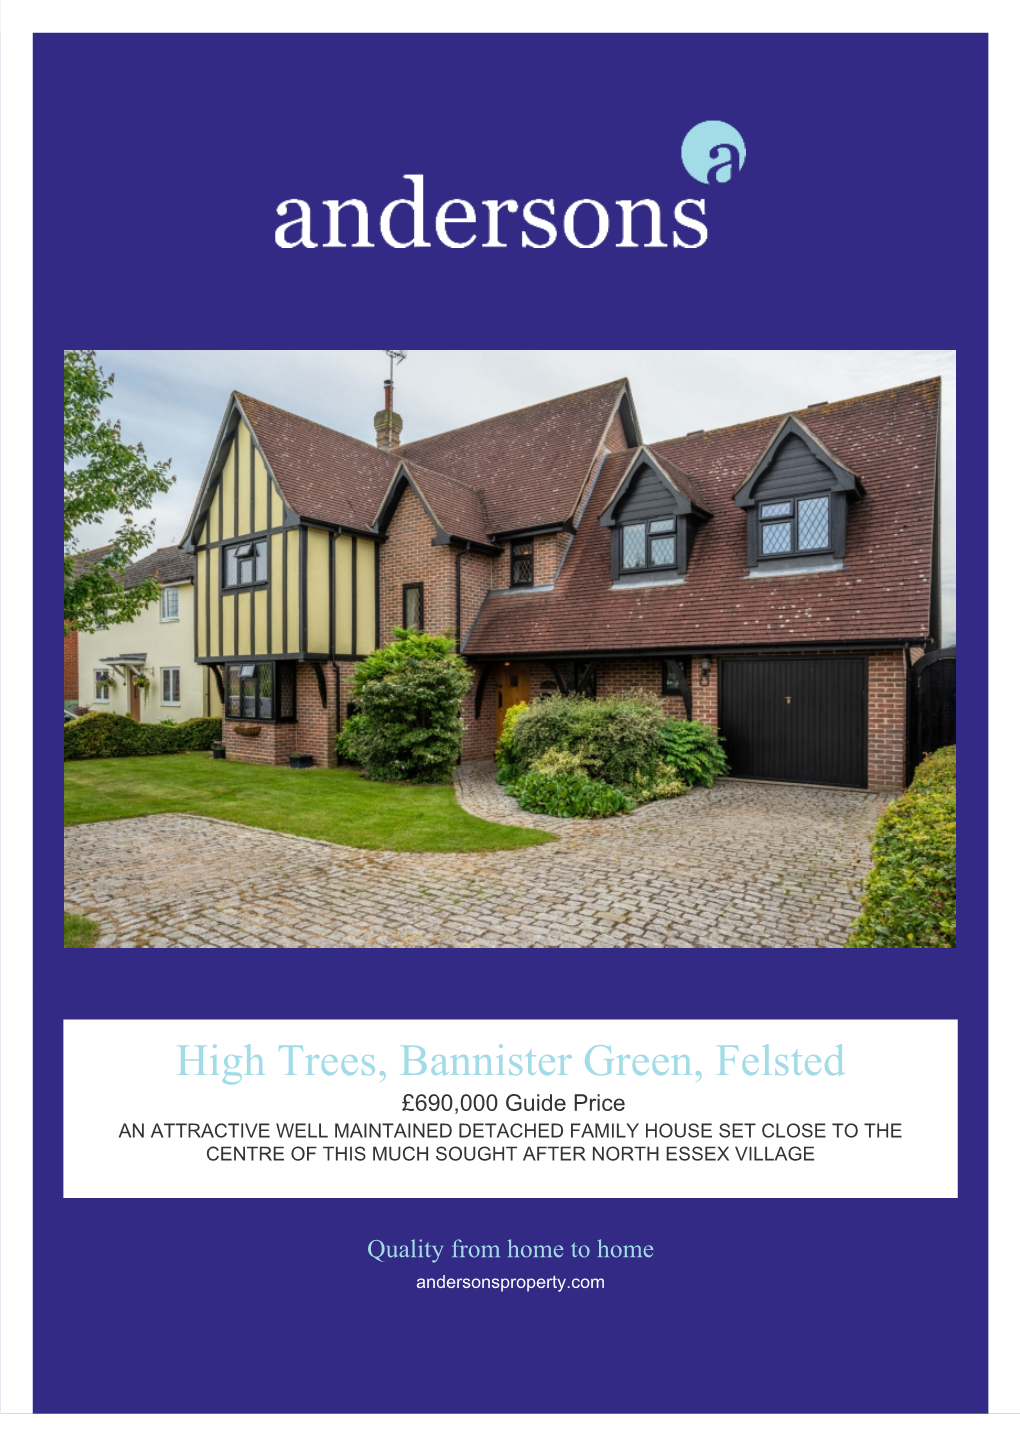 High Trees, Bannister Green, Felsted £690,000 Guide Price an ATTRACTIVE WELL MAINTAINED DETACHED FAMILY HOUSE SET CLOSE to THE